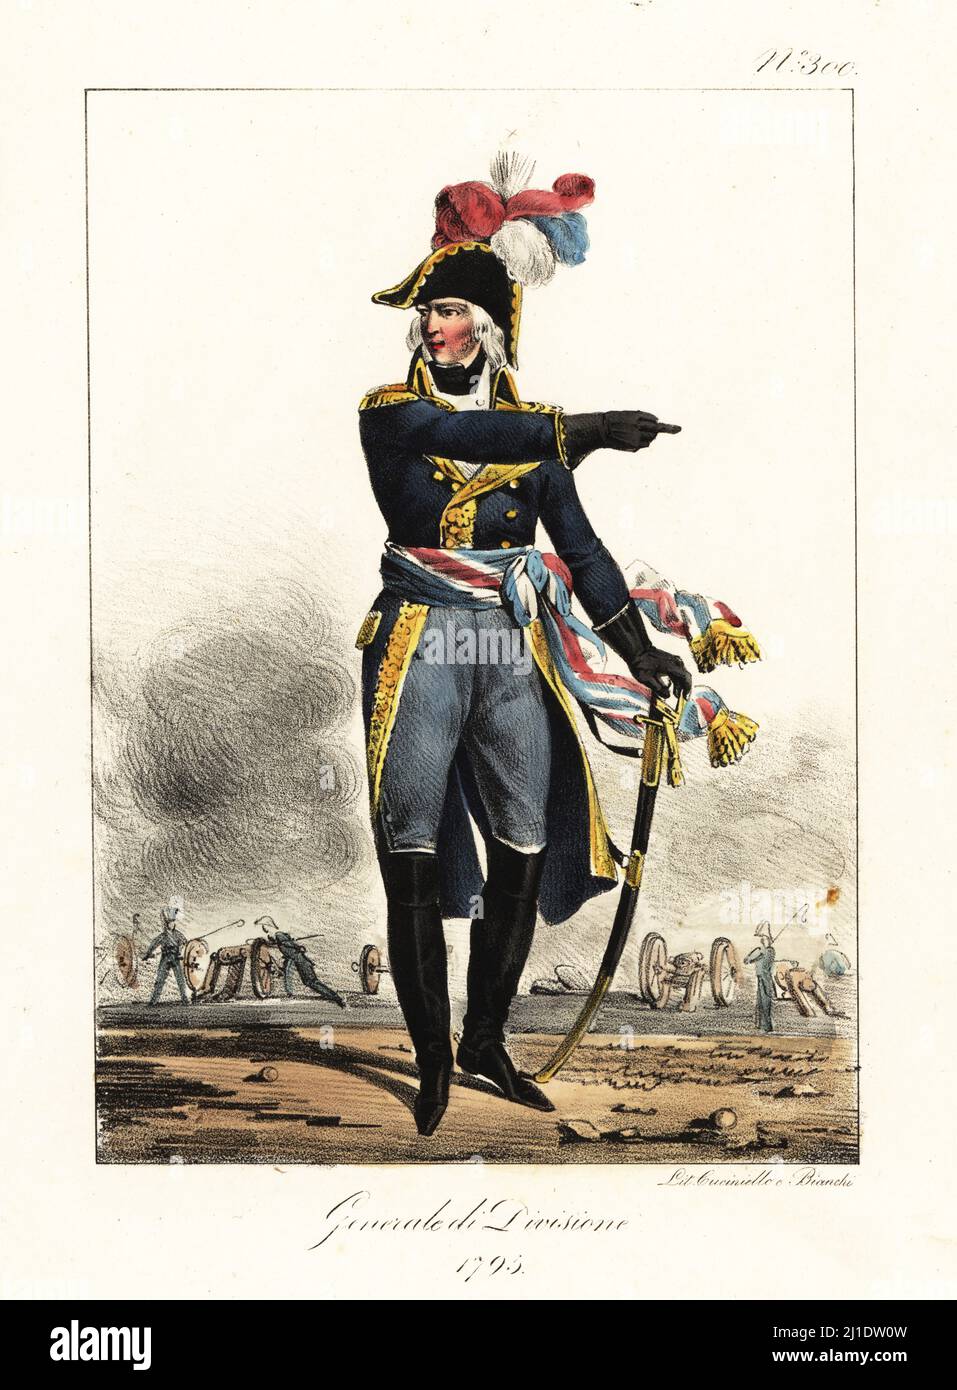 Uniform of a General in the French Revolutionary Army, 1795. He wears a bicorne with tricolor plumes, blue coat with gold epaulettes, cravat, tricolor sash belt, blue trousers, and boots. He issues orders to artillery gunners. General de Division. Handcoloured lithograph by Lorenzo Bianchi and Domenico Cuciniello after Hippolyte Lecomte from Costumi civili e militari della monarchia francese dal 1200 al 1820, Naples, 1825. Italian edition of Lecomte’s Civilian and military costumes of the French monarchy from 1200 to 1820. Stock Photo